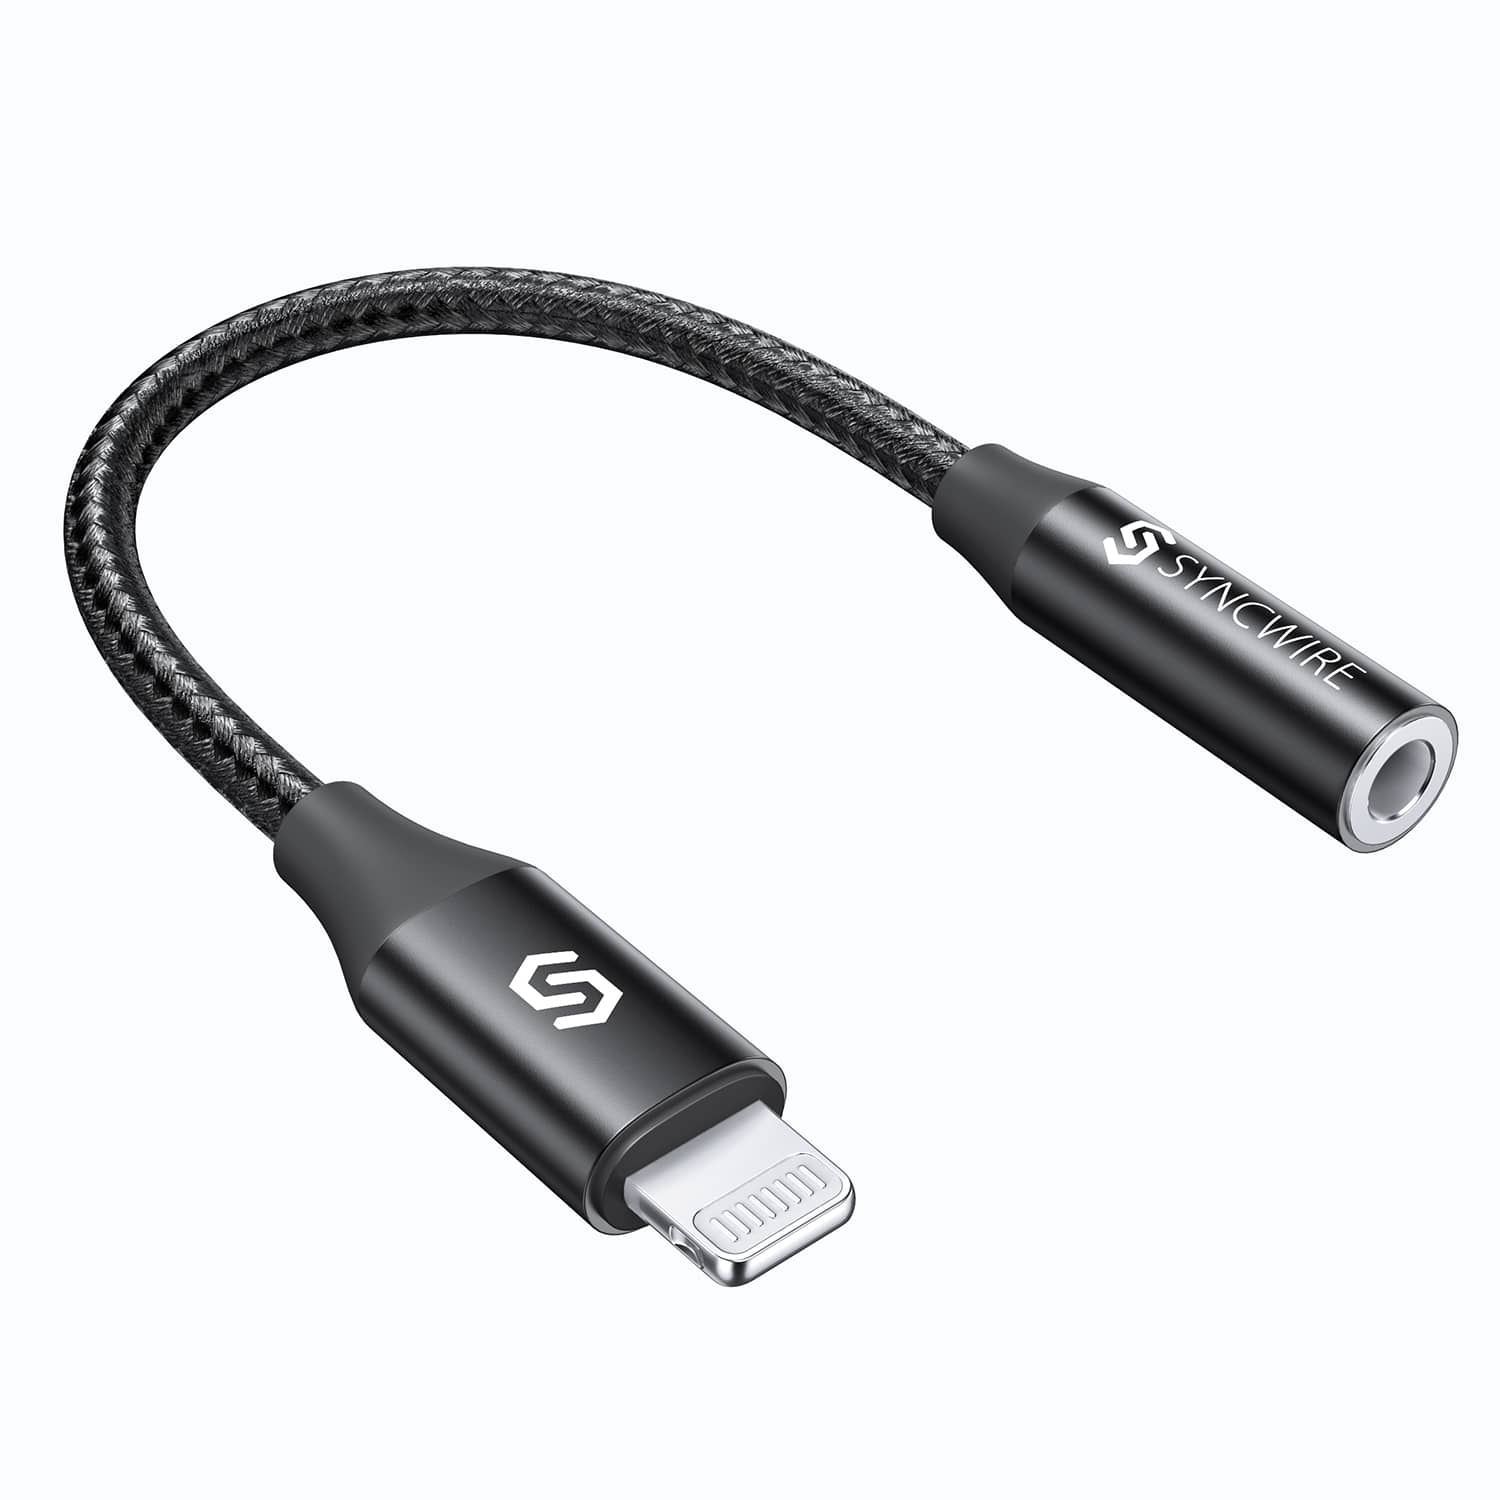 Syncwire Lightning to 3.5mm Headphone Jack Adapter Black - Syncwire